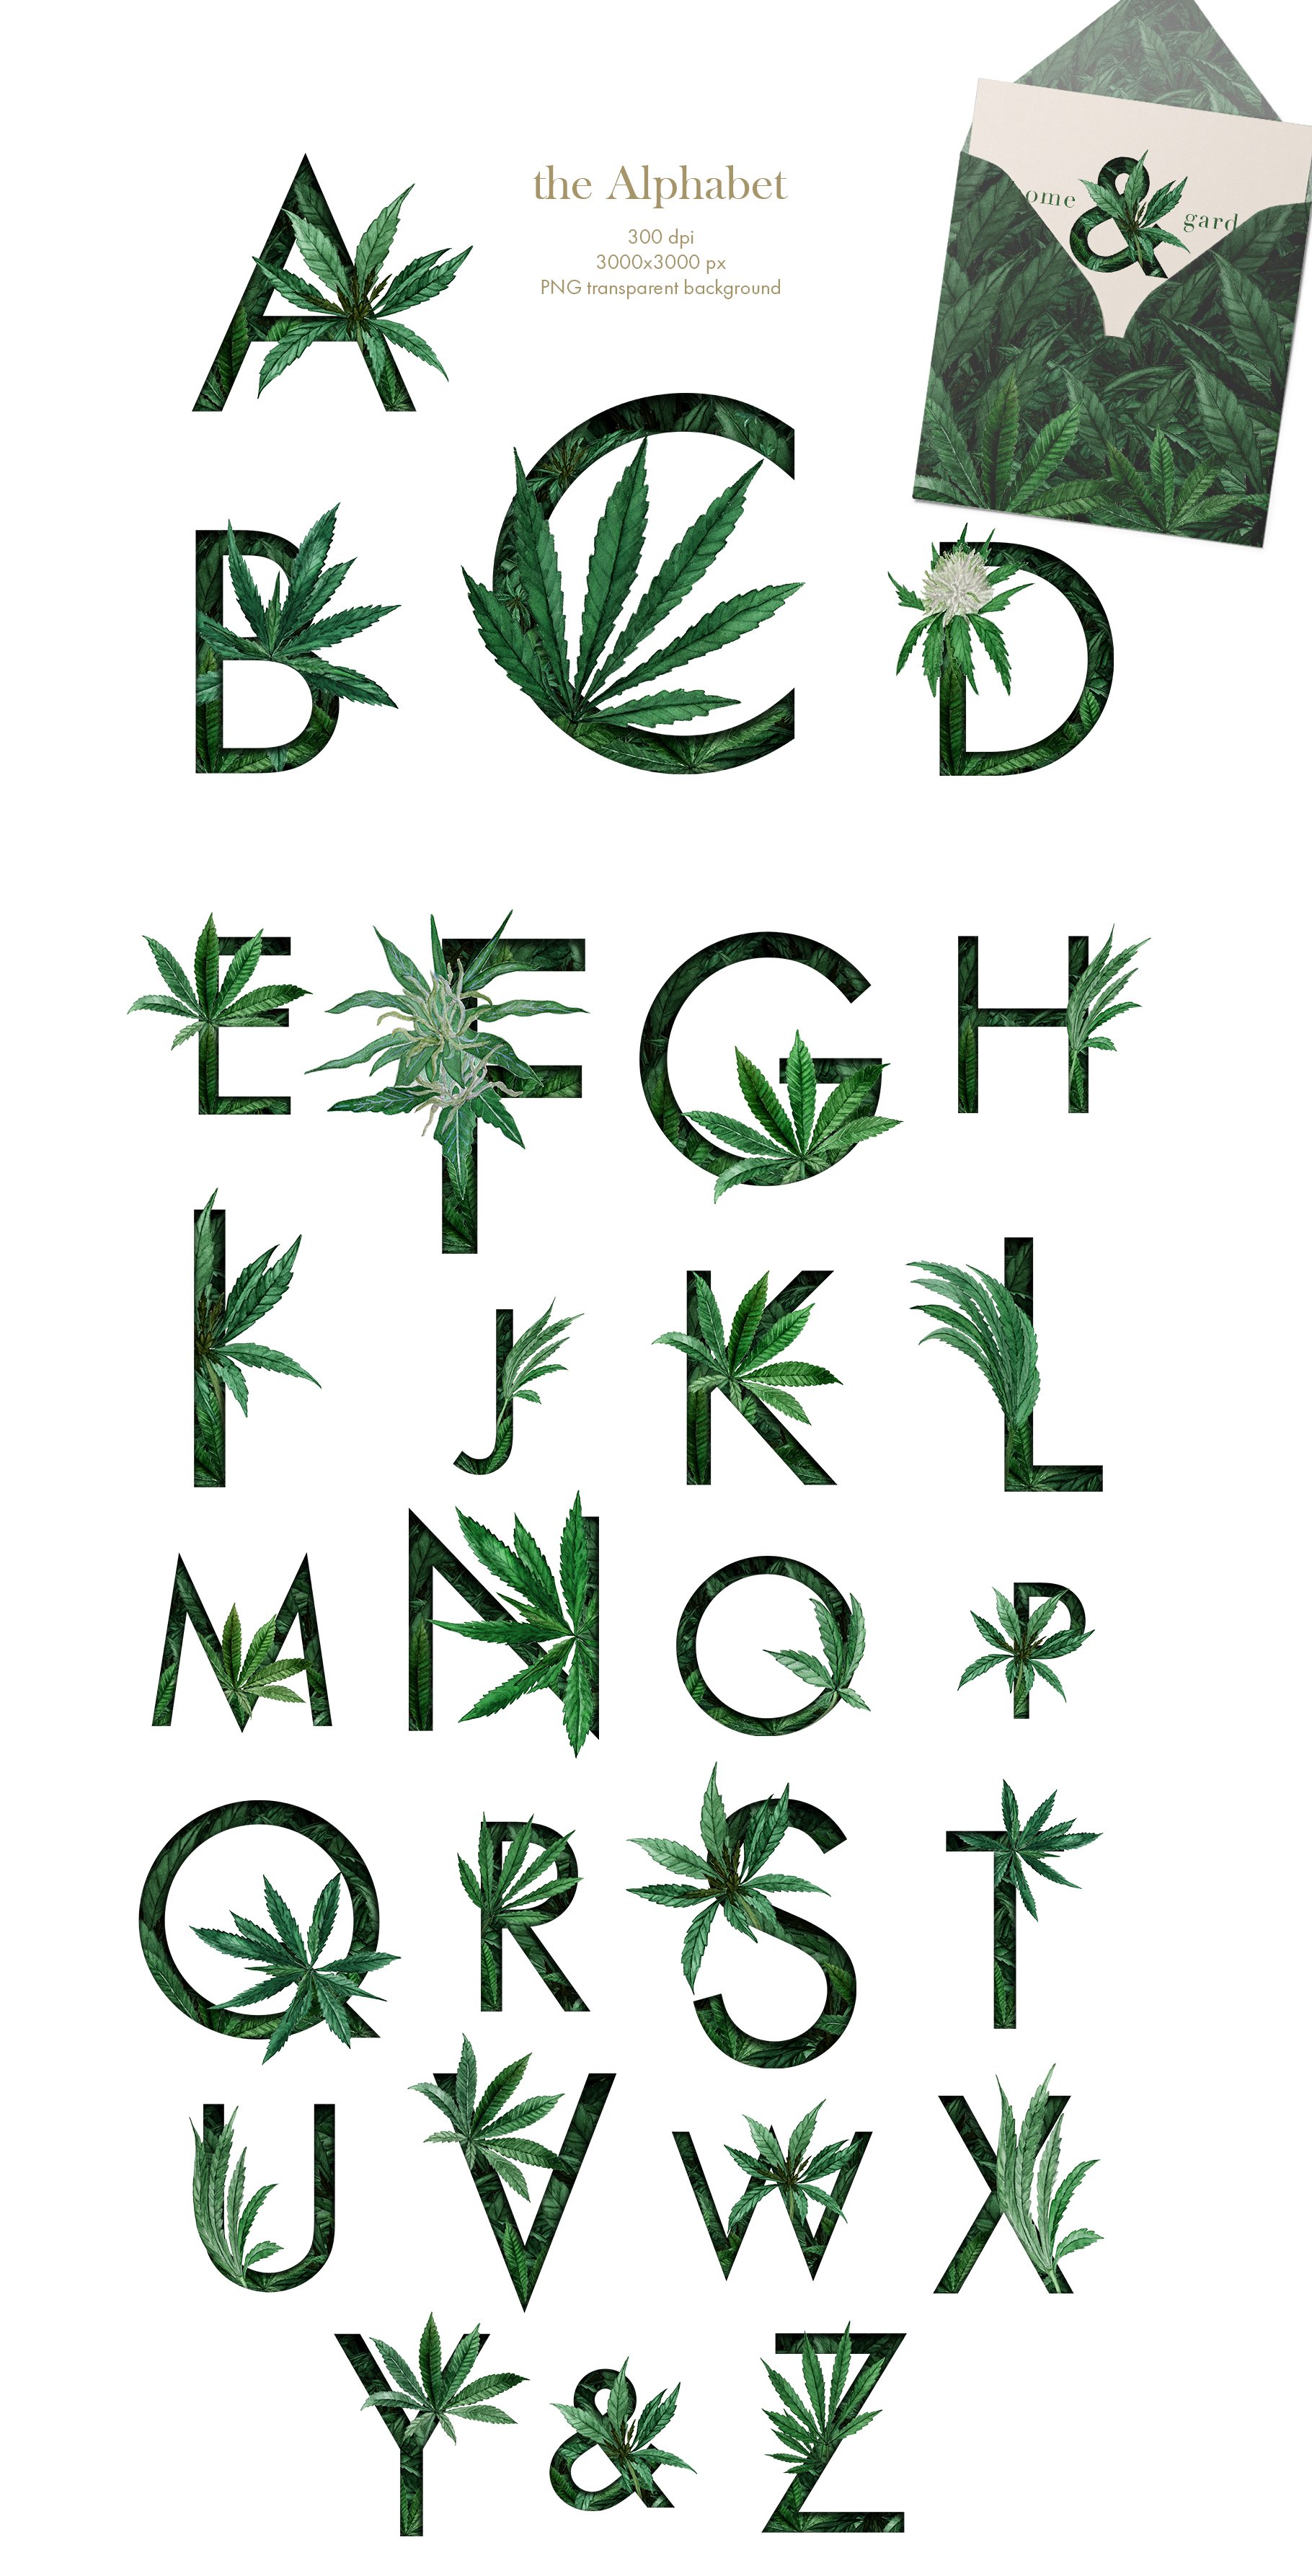 Poster with the letters and numbers made out of marijuana leaves.